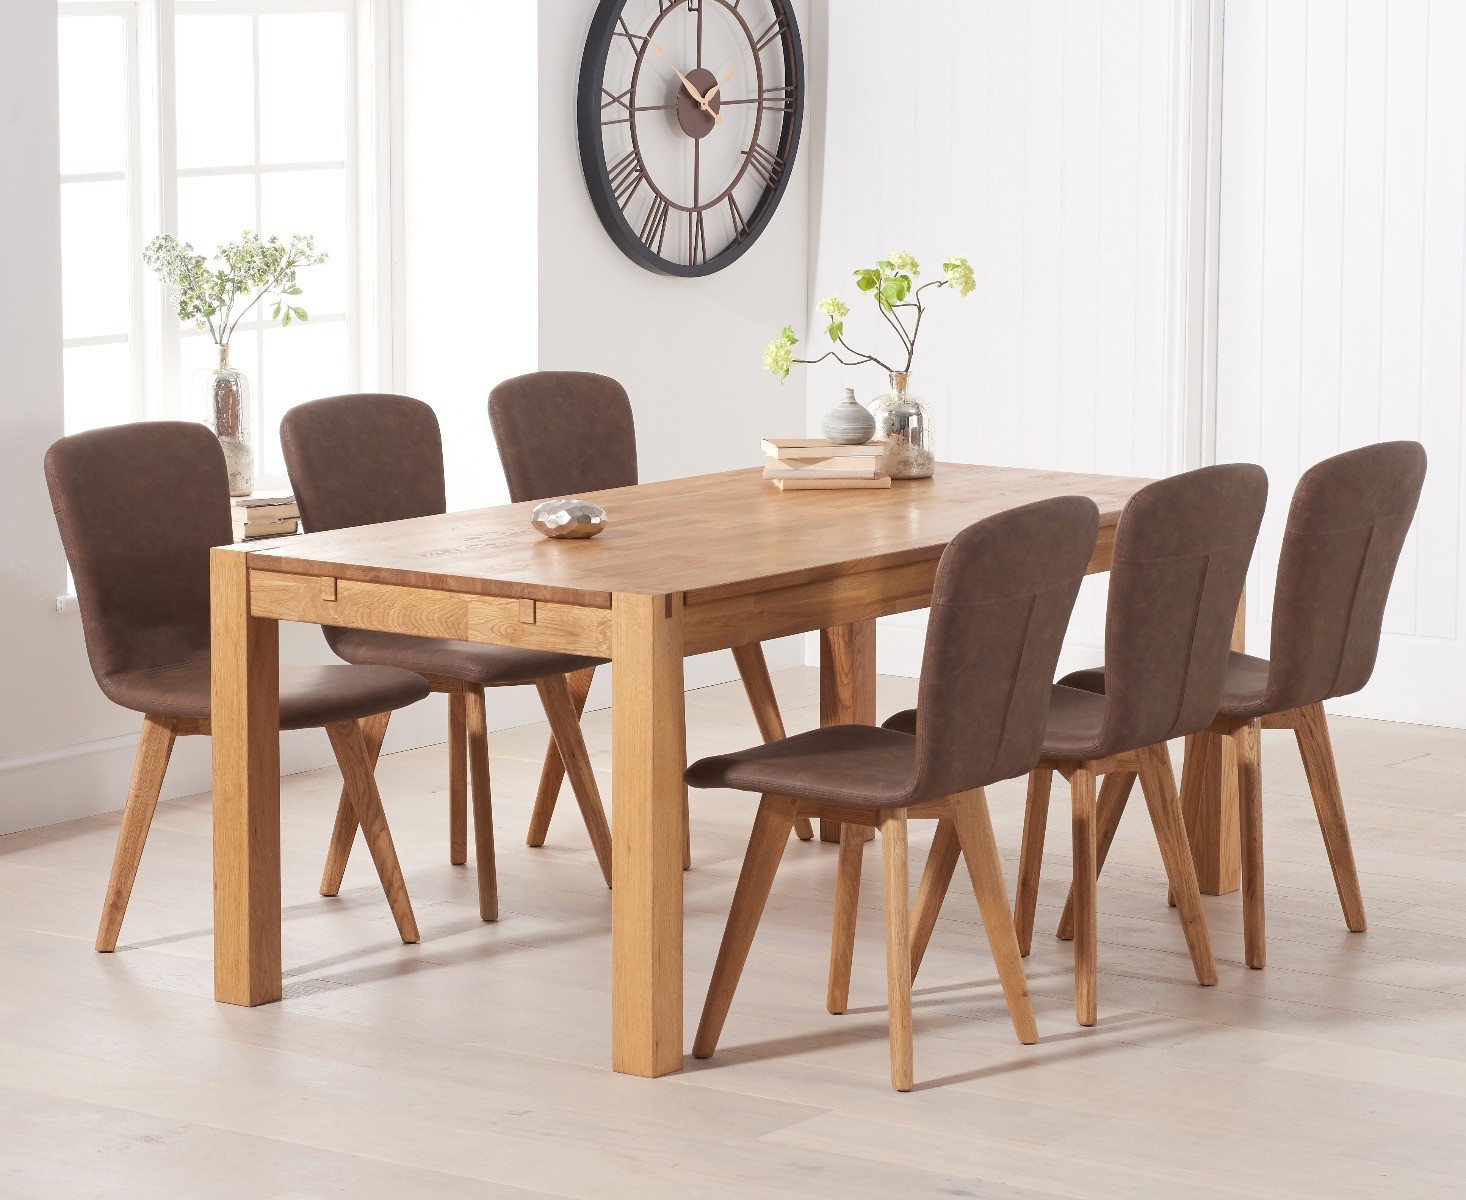 Photo 3 of Thetford 150cm oak dining table with 6 grey ruben chairs